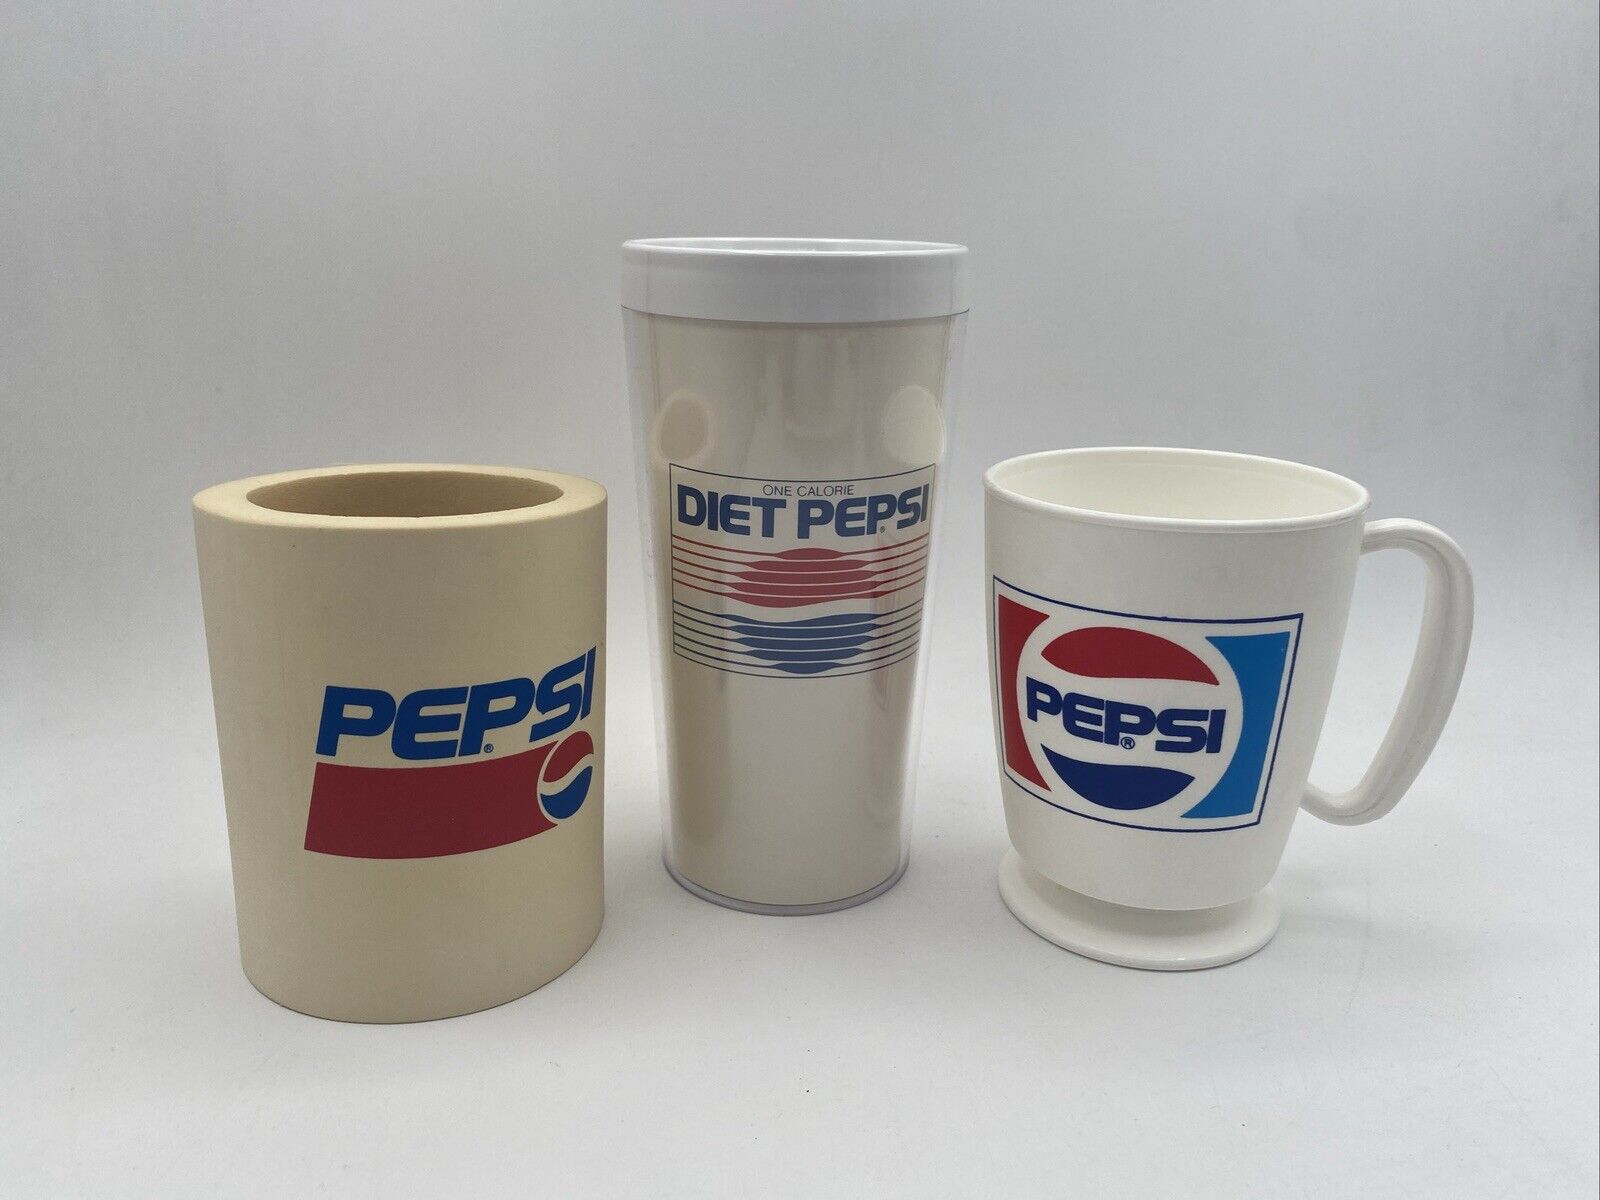 Set Of 3 VTG Pepsi Insulated Cup Coozie Plastic Mug USA Diet One Calorie